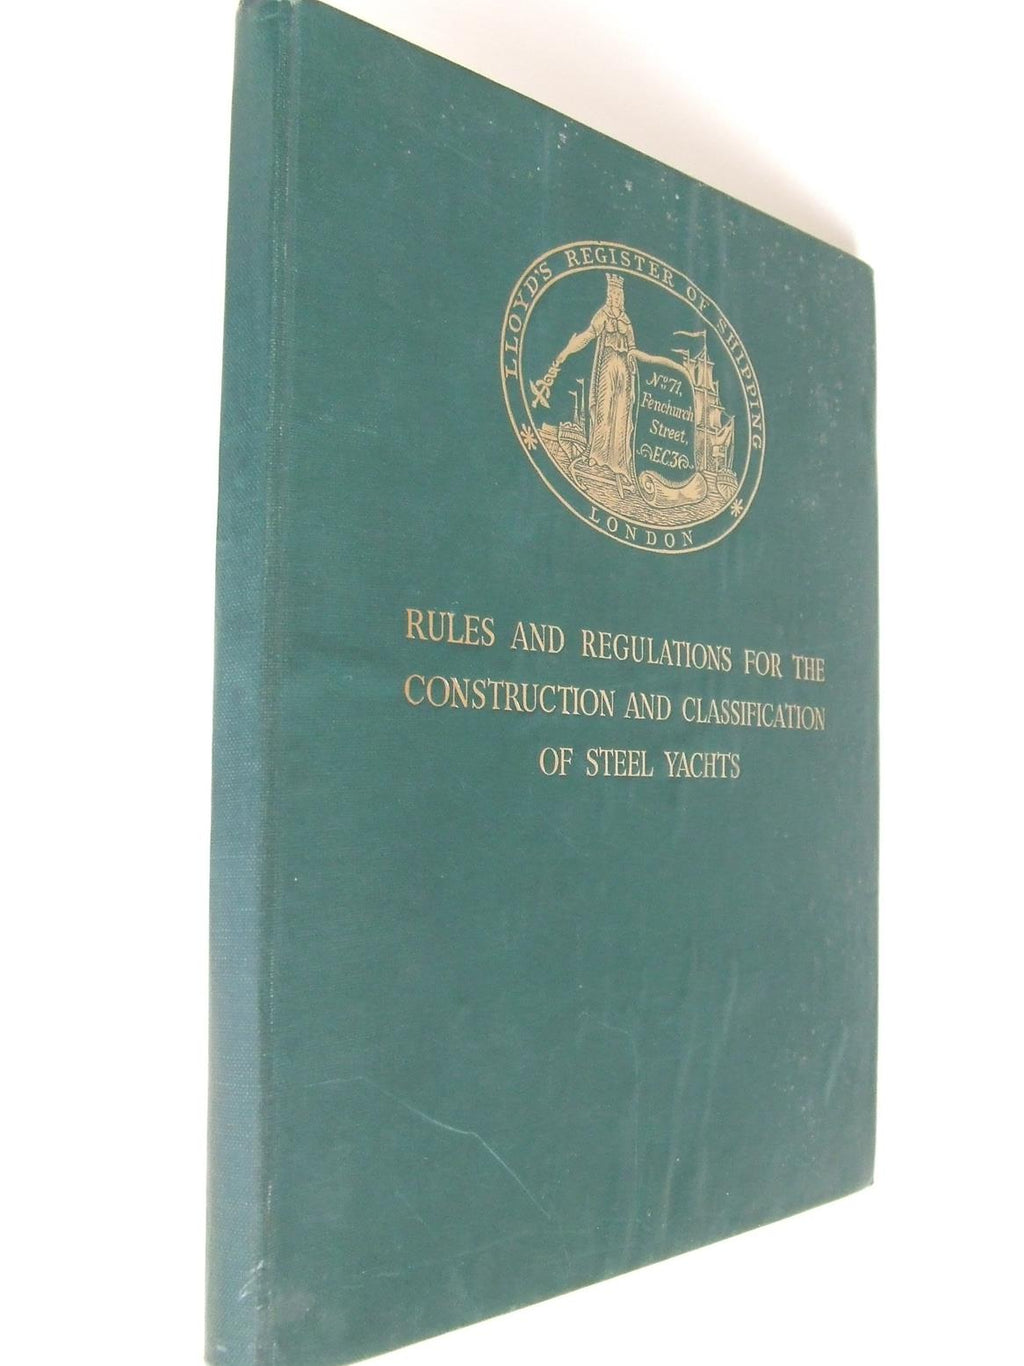 Rules and Regulations for the Construction and Classification of Yachts